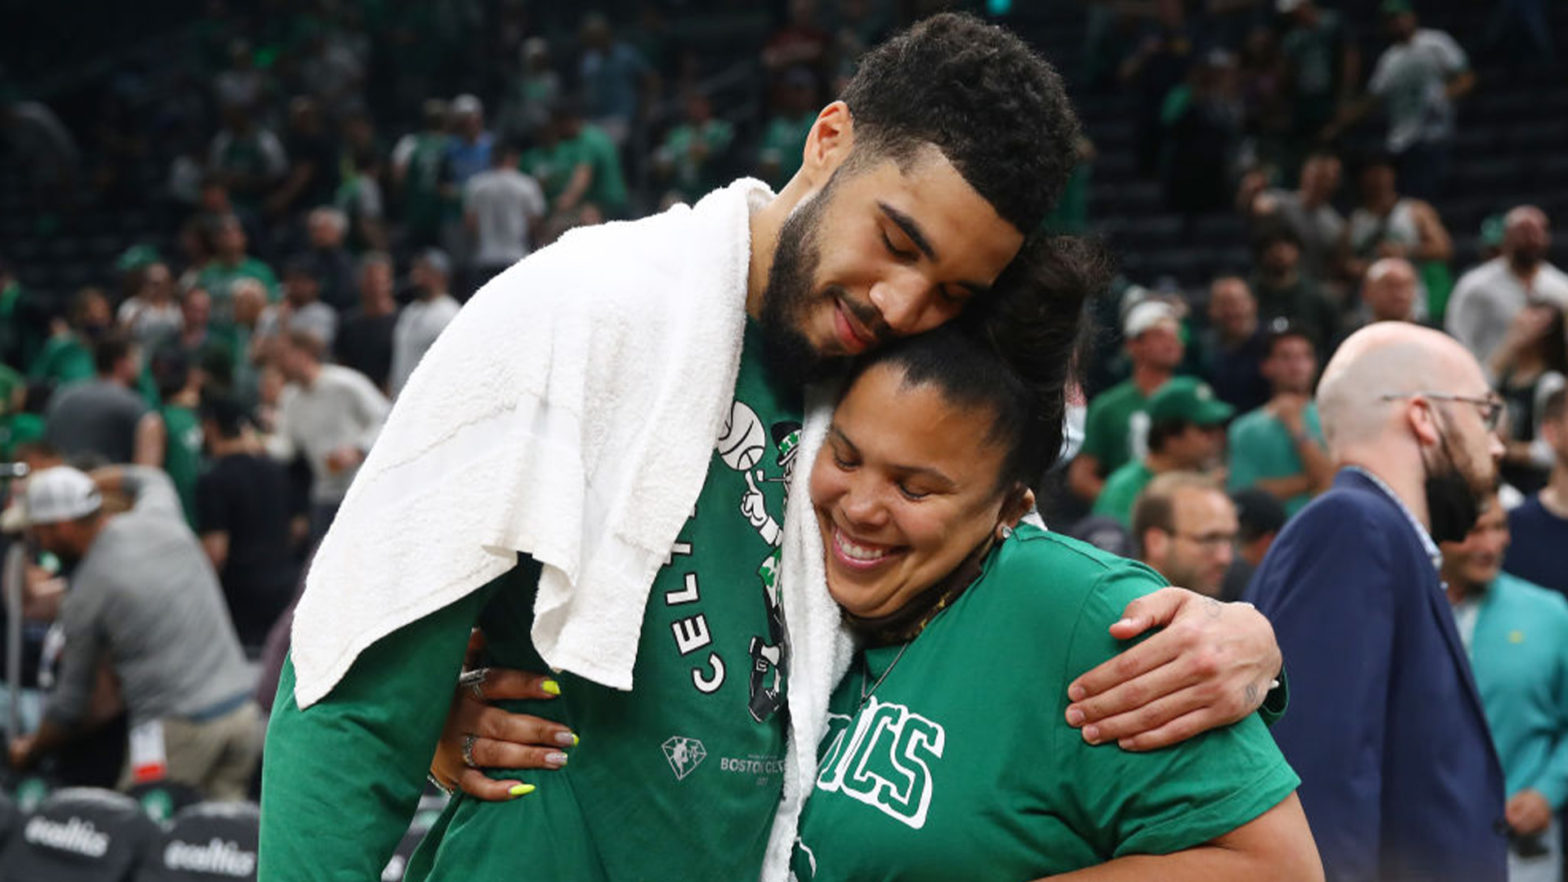 Jayson Tatum Made A Deal With His Mom To Not Spend The Money He Makes From The Boston Celtics